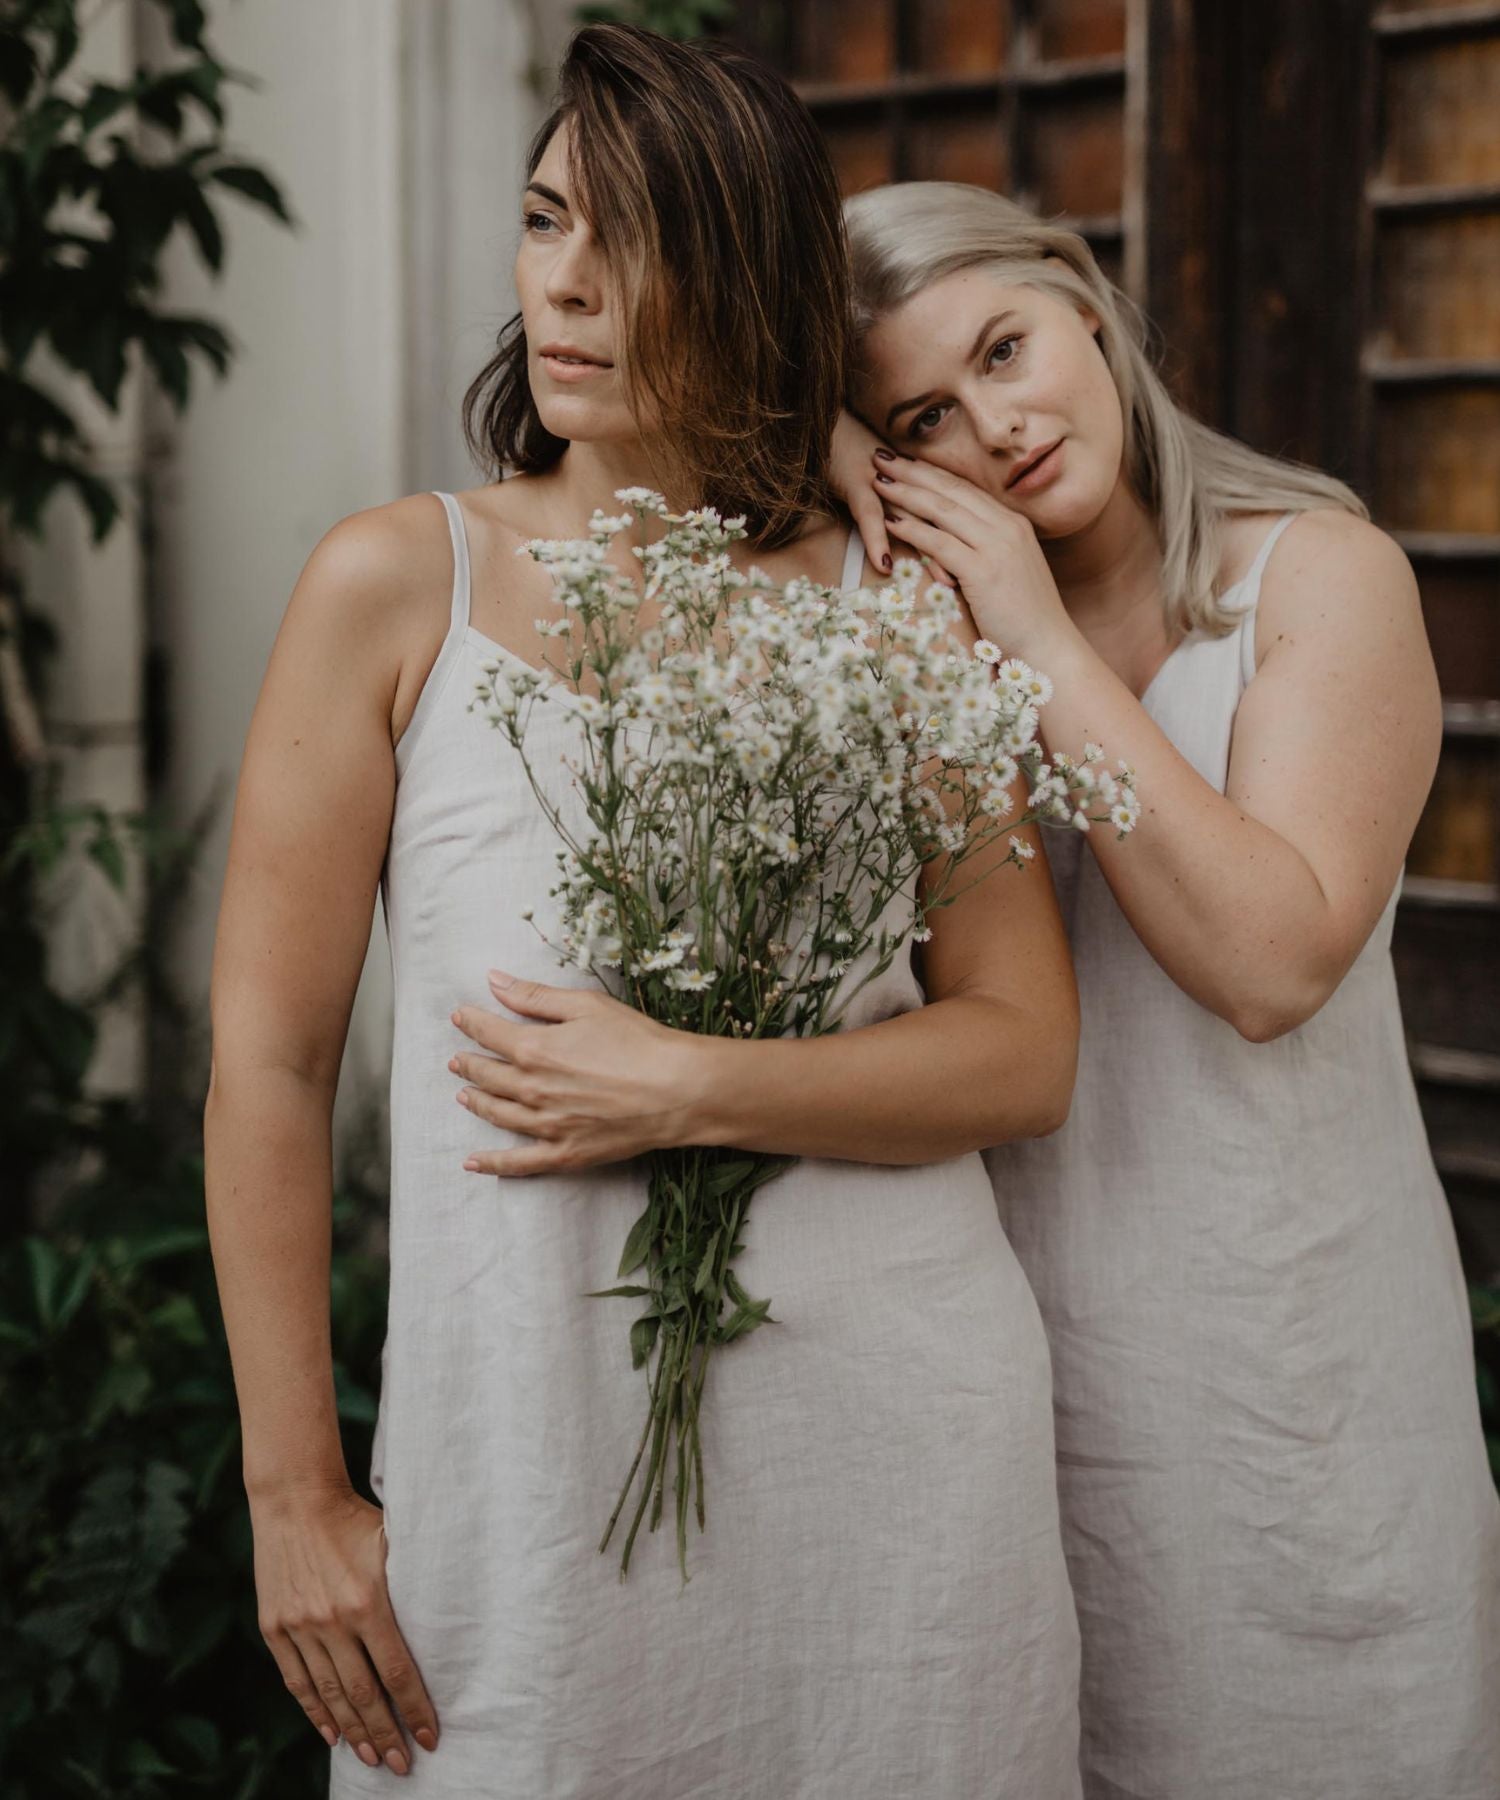 Two Women Standing In Linen Dresses With A Bouquet Of Flowers